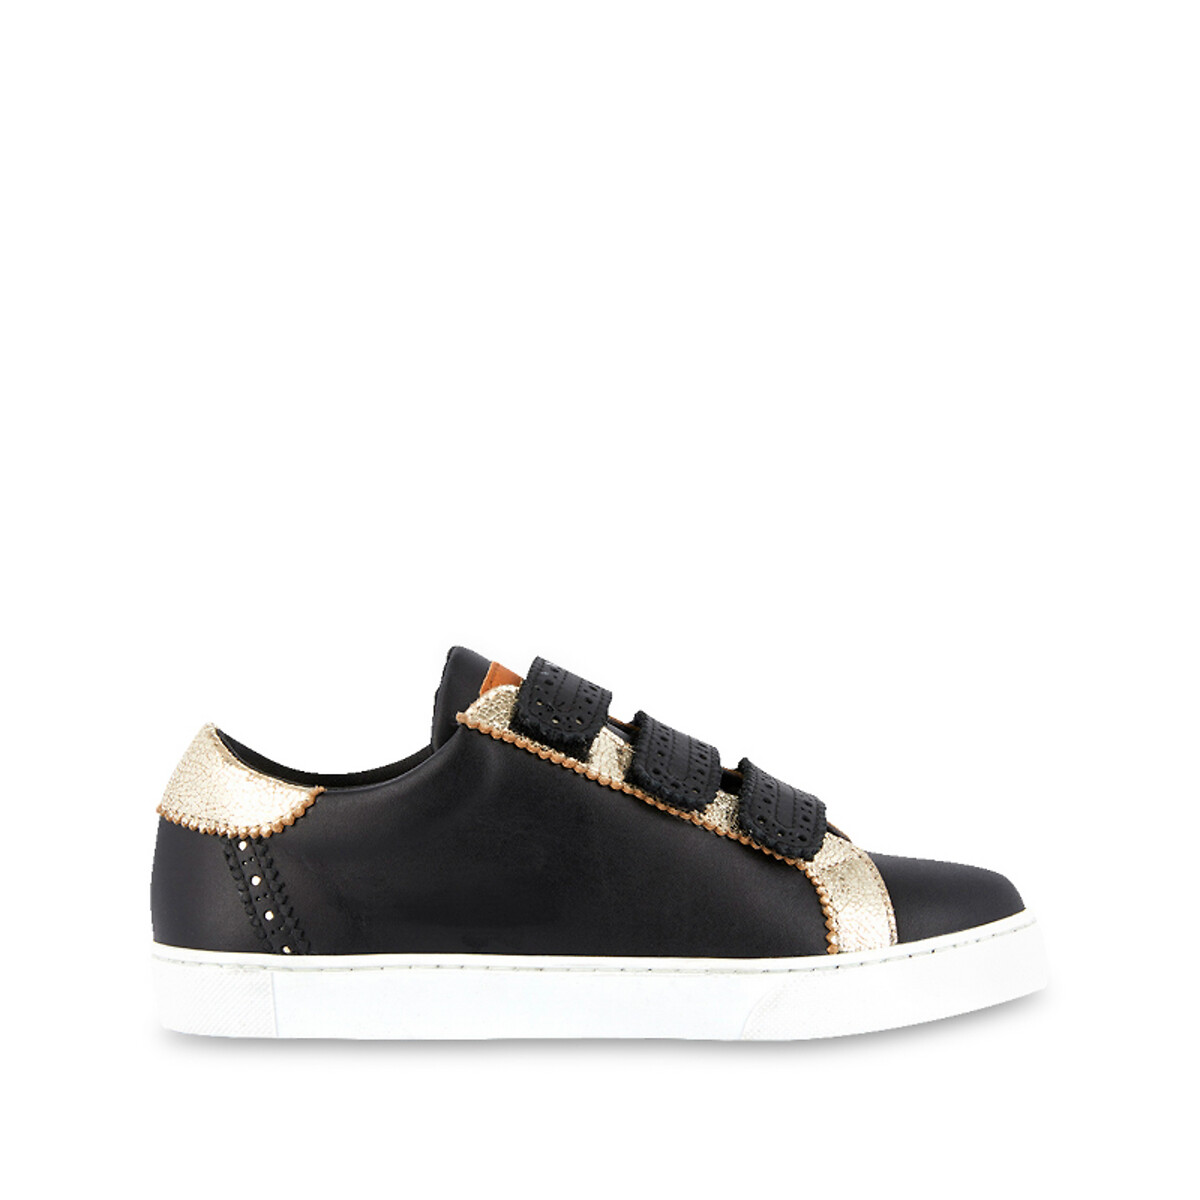 Suzette Leather Trainers